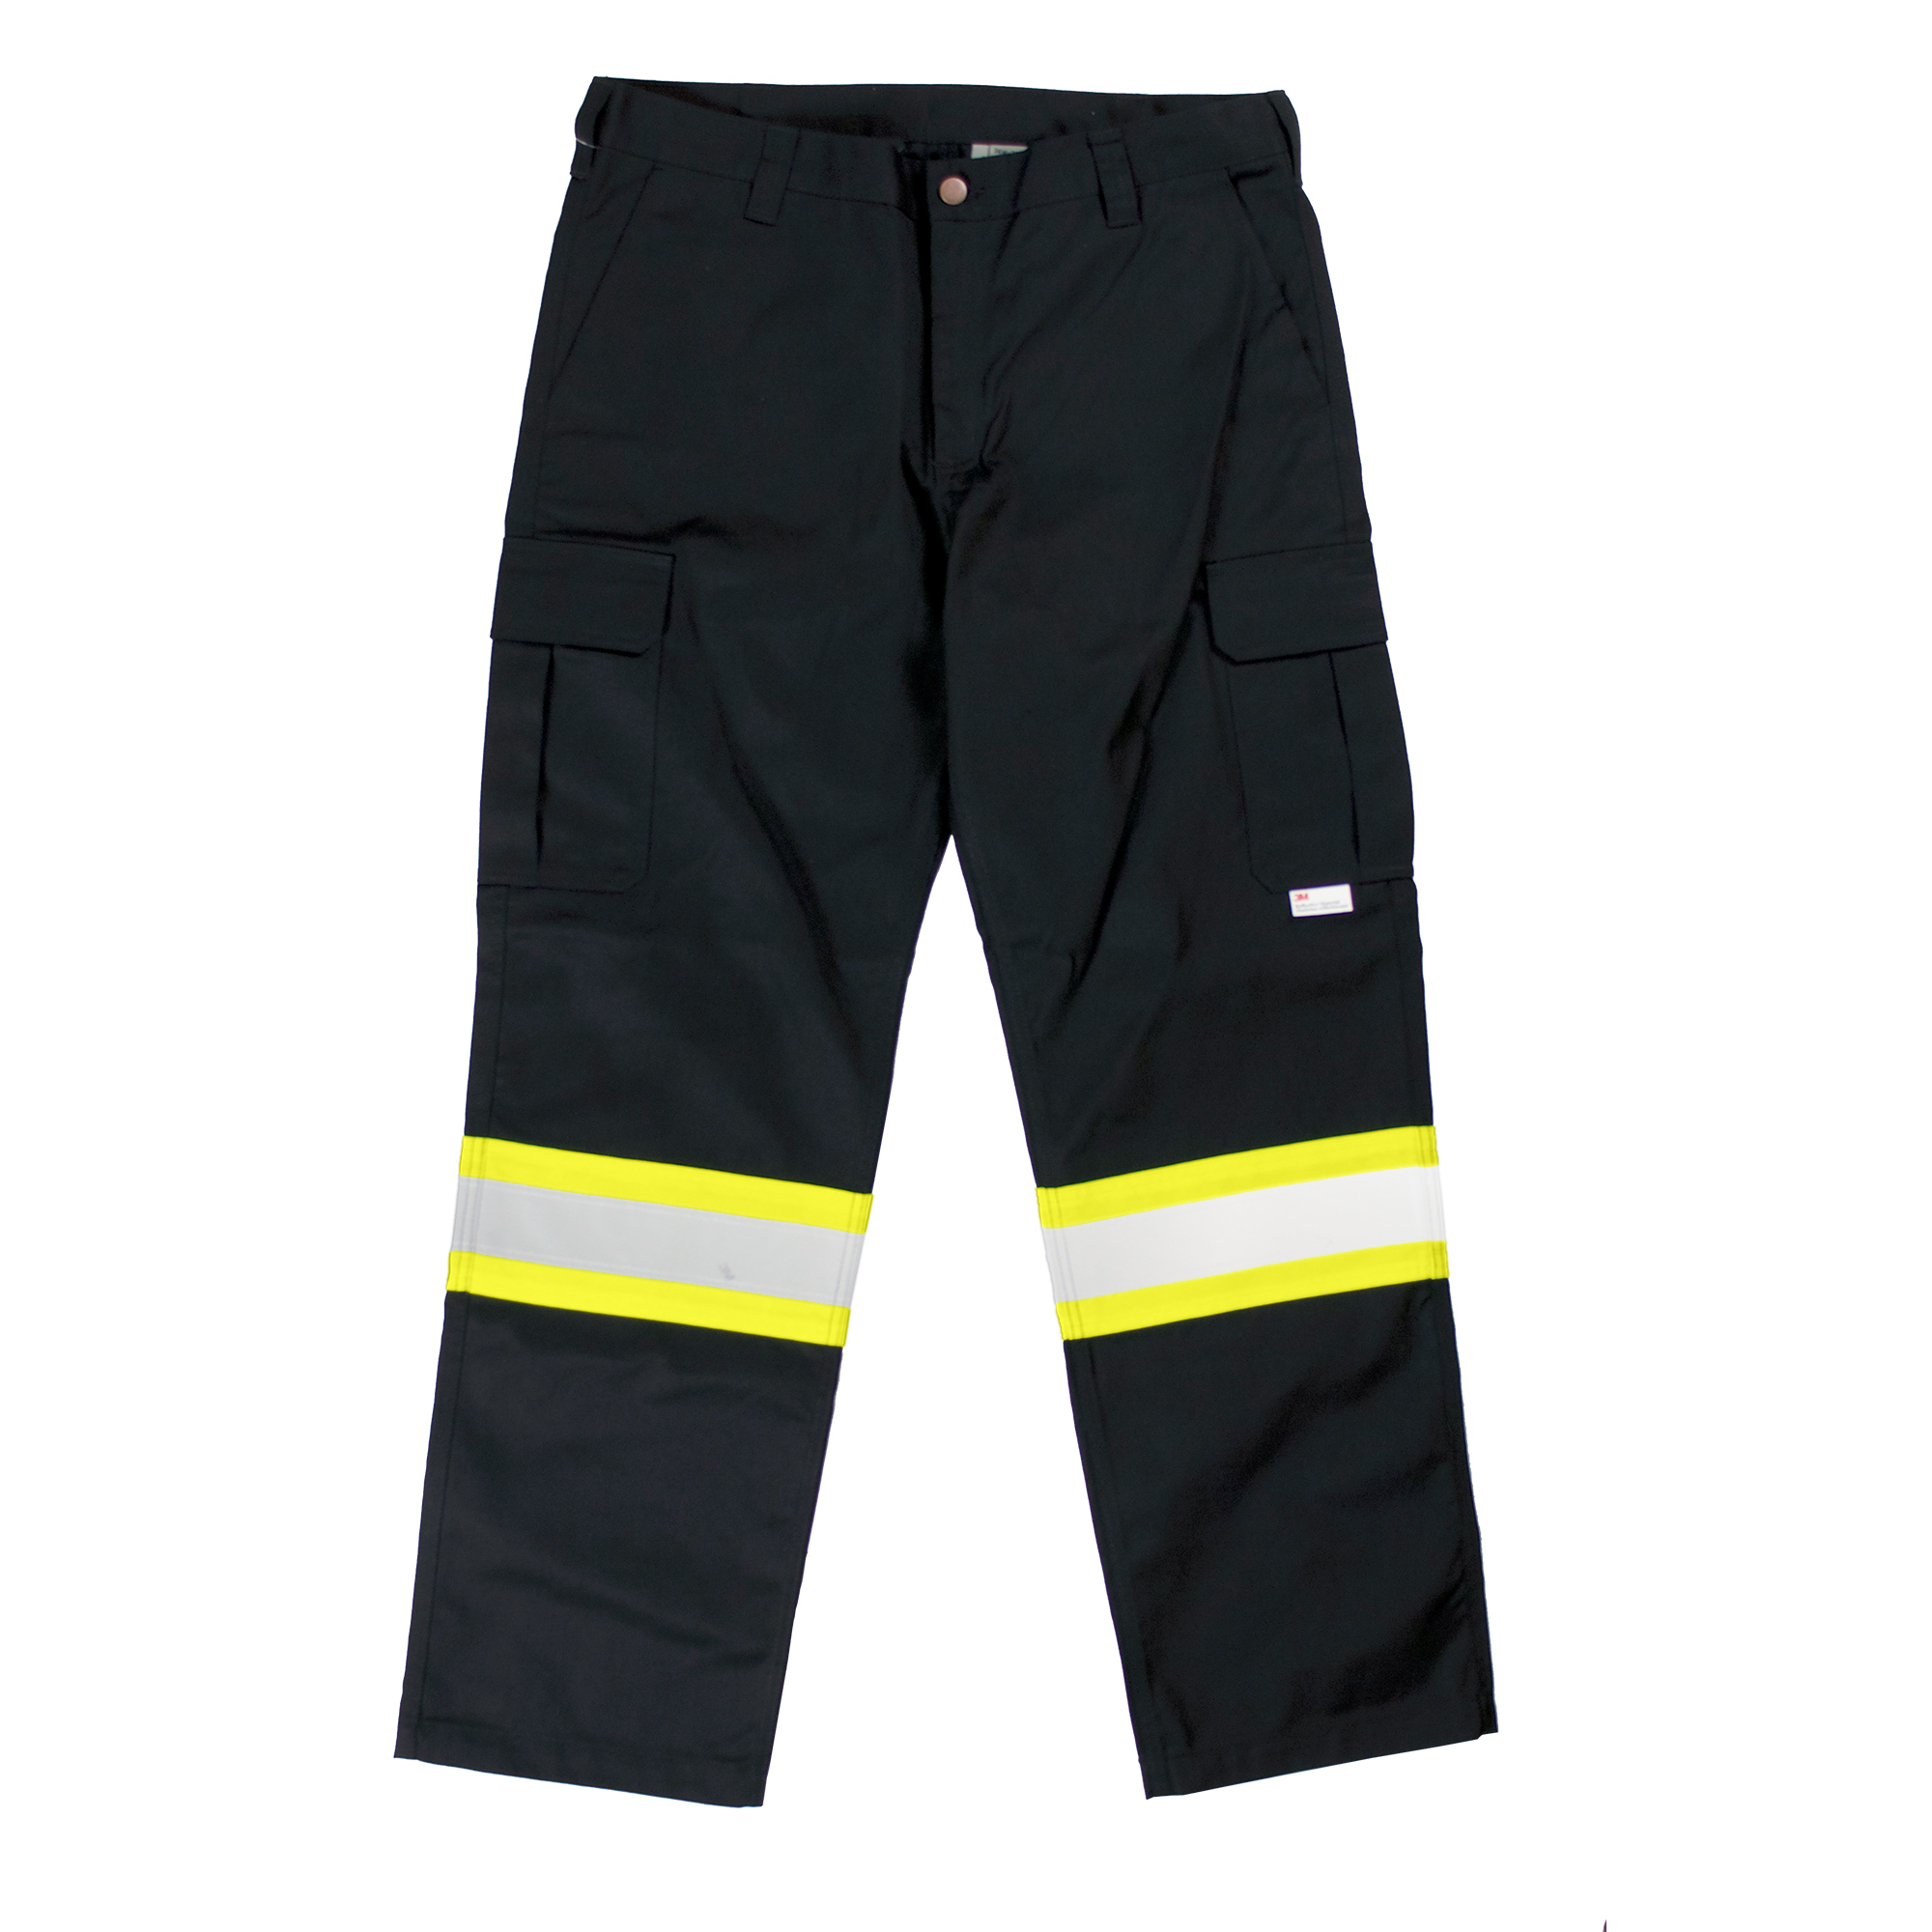 Tough Duck, Safety Cargo Utility Pant, Waist 44 in, Inseam 30 in, Color Black, Model S60701